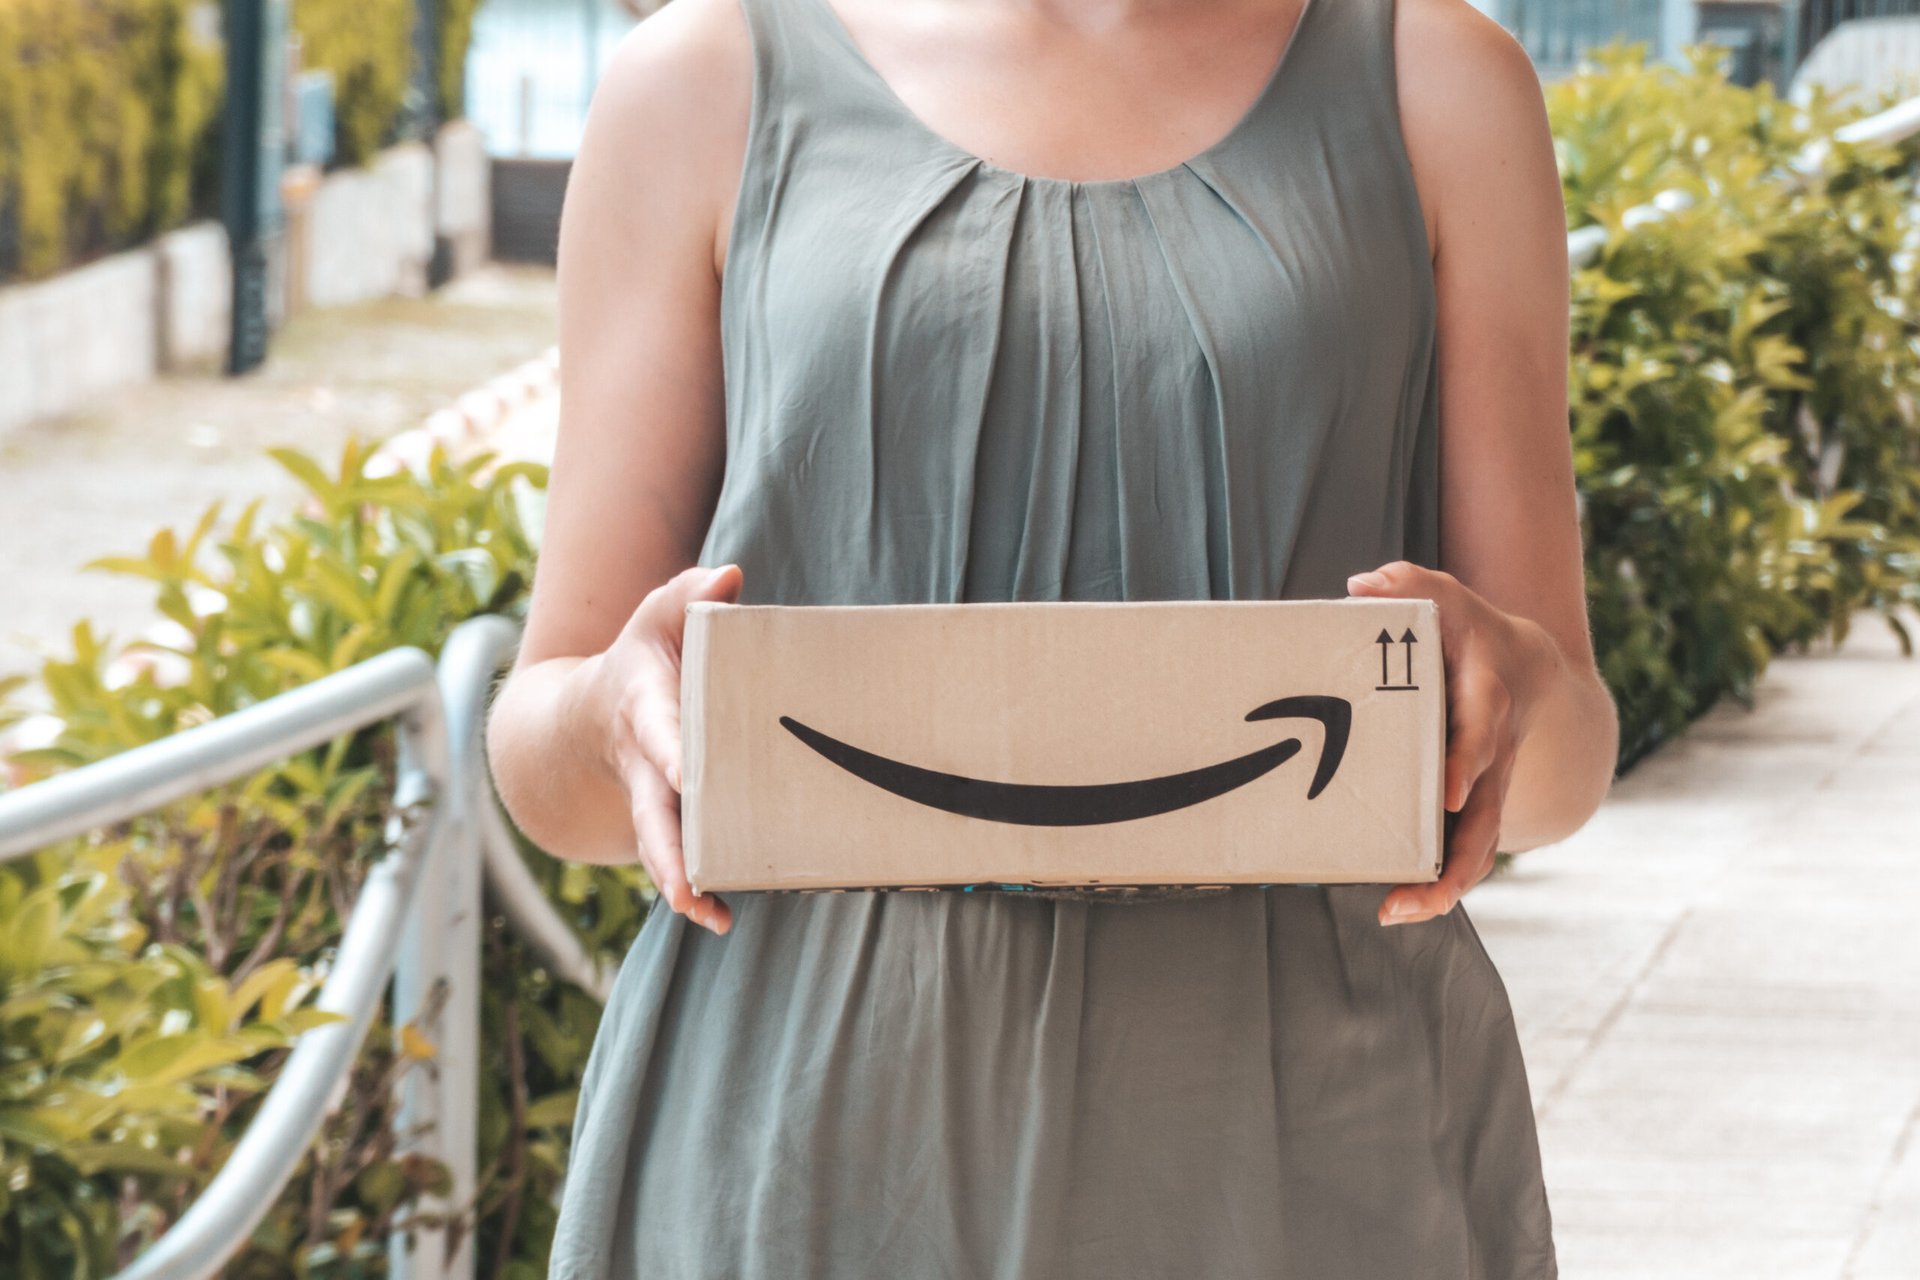 Here Are 5 Ways to Get Amazon Prime for Free